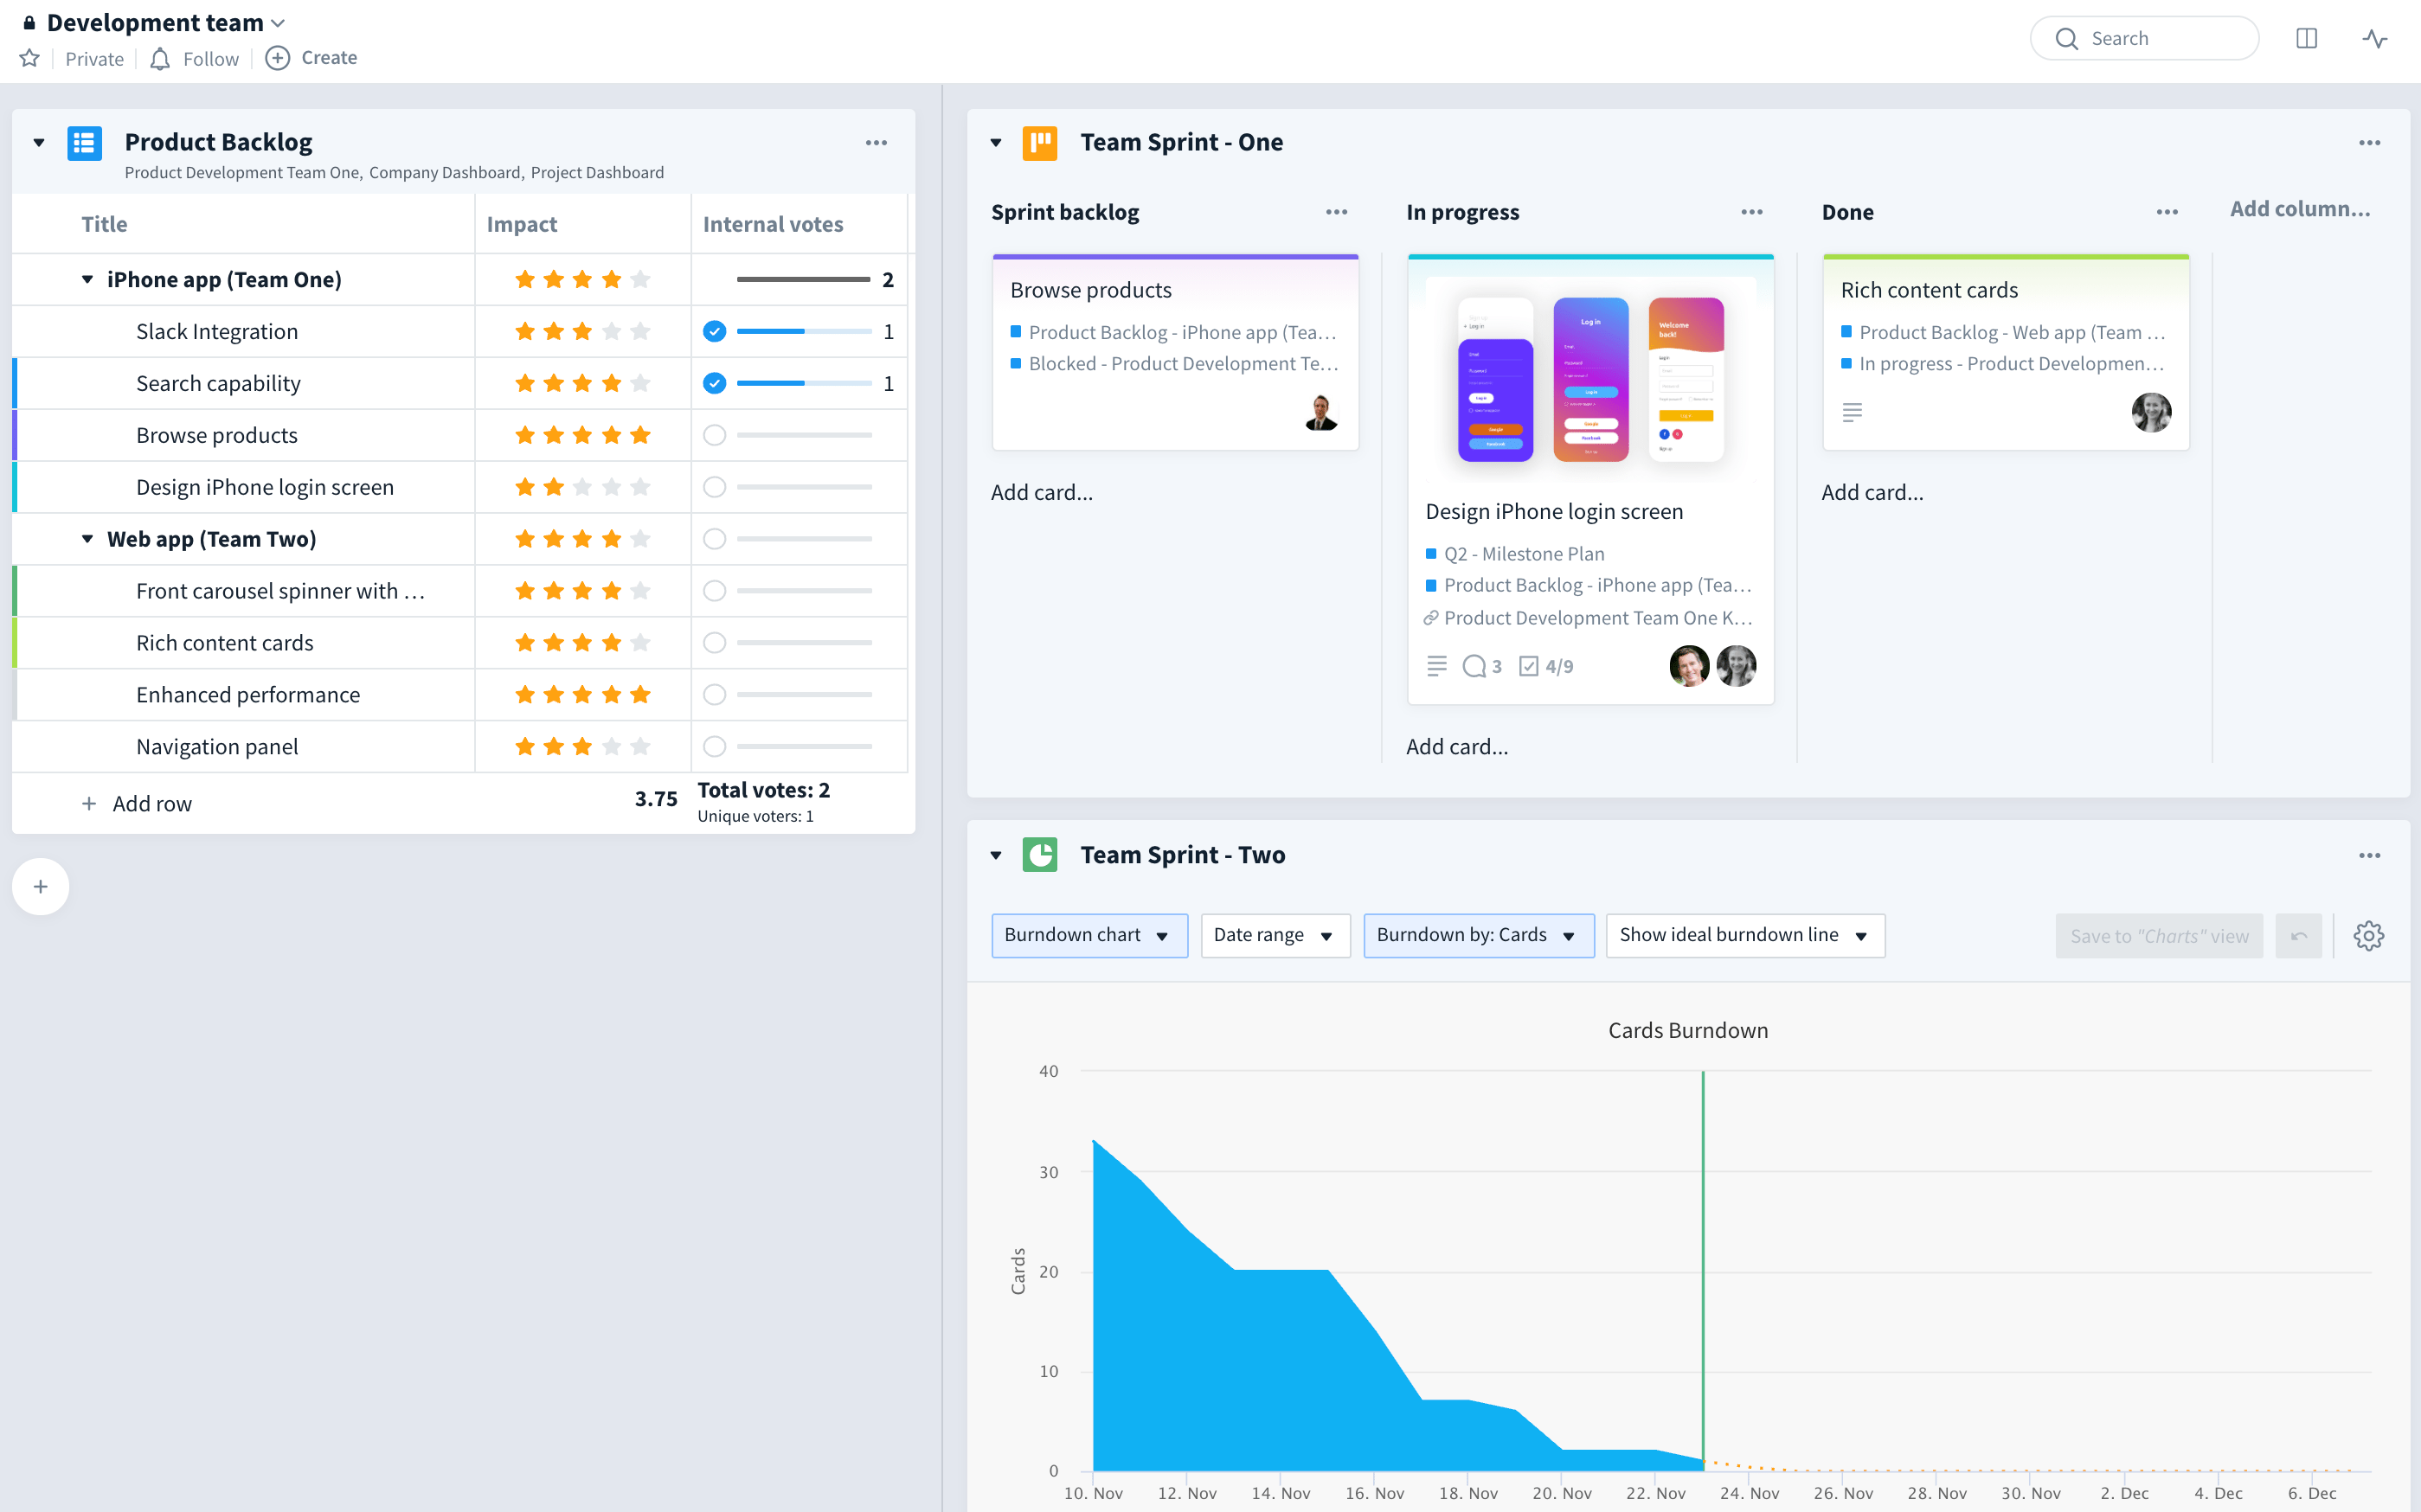 Favro - Unlike other apps, Favro lets you see multiple boards in single screen collections, even boards from other teams and other projects. Replace tools like Trello, Monday or Asana.